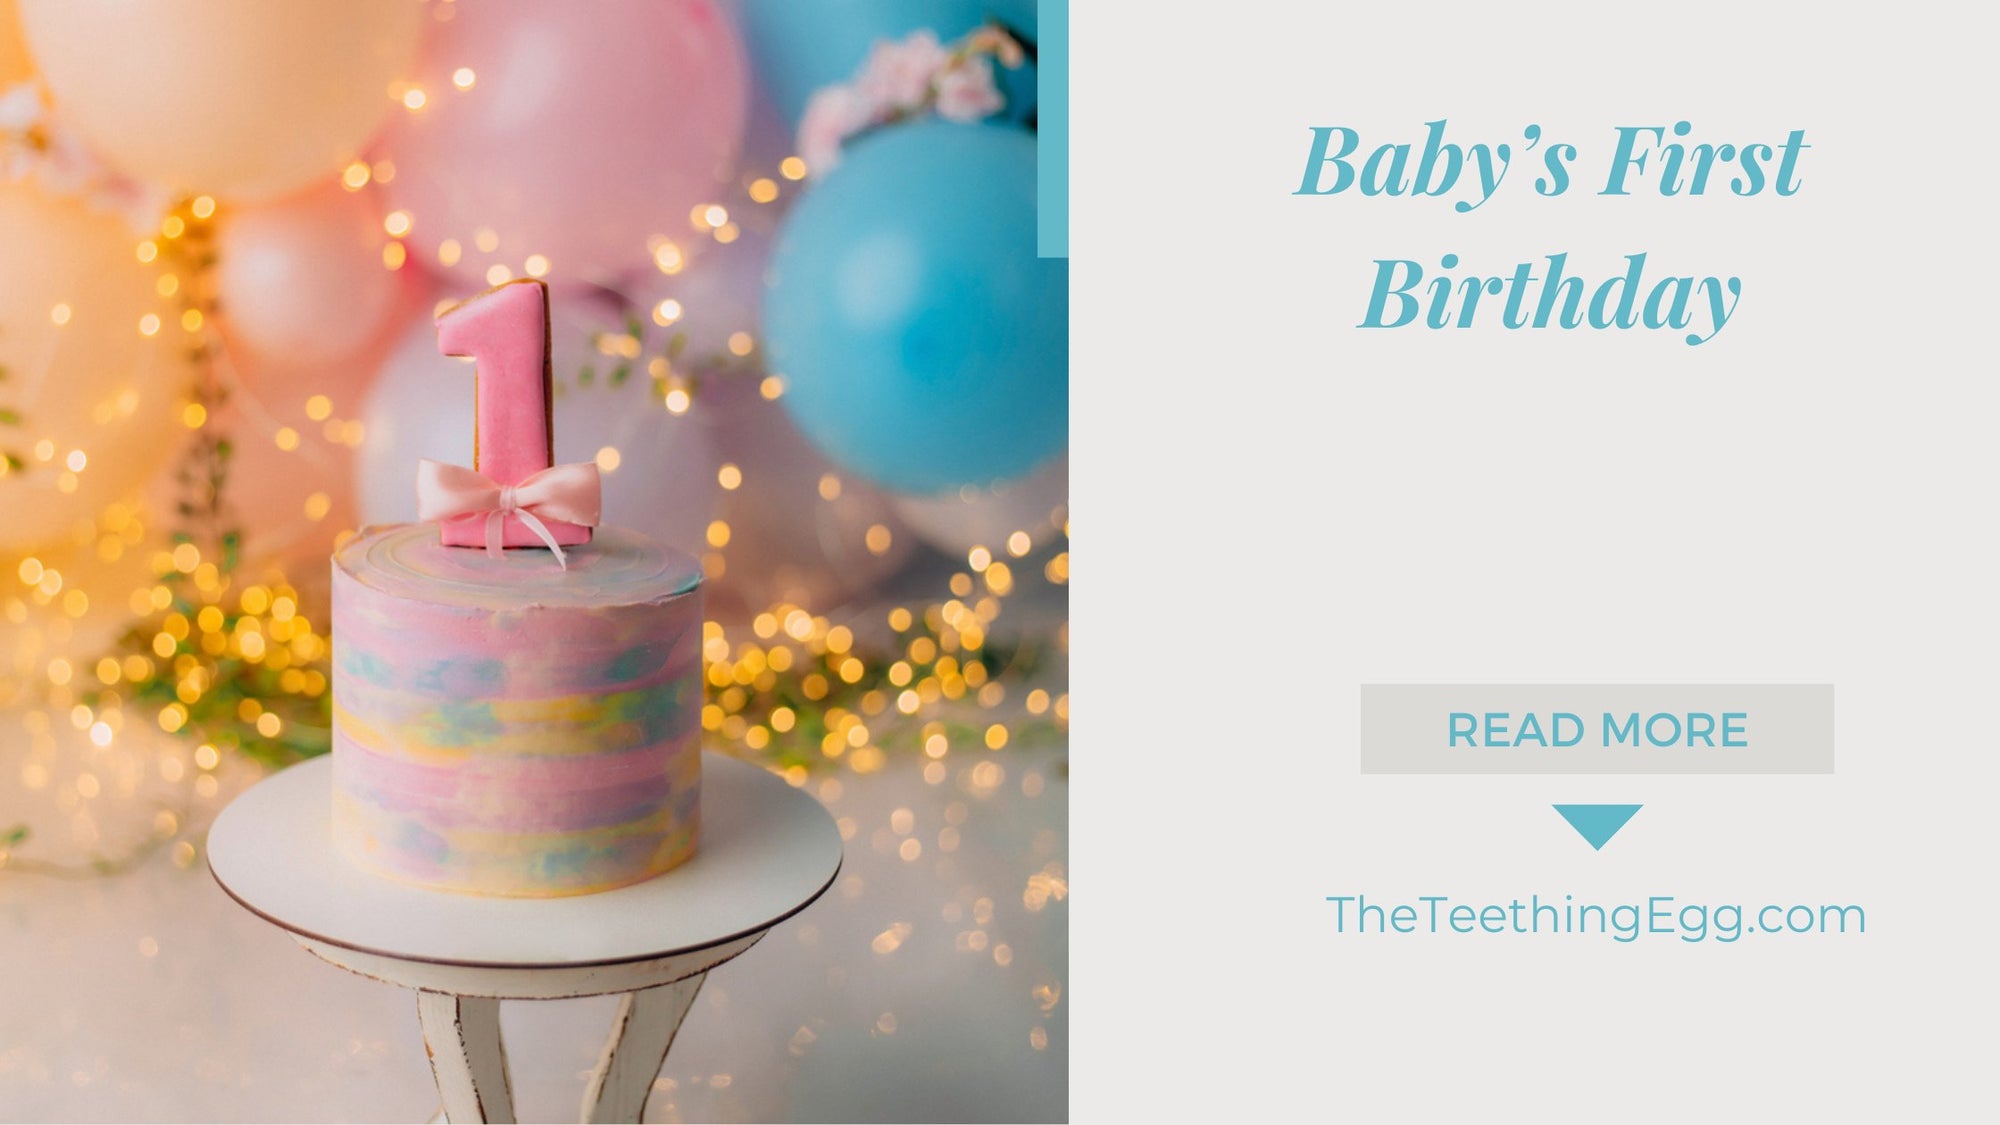 Baby’s First Birthday: The Best First Birthday Party Ideas and Themes